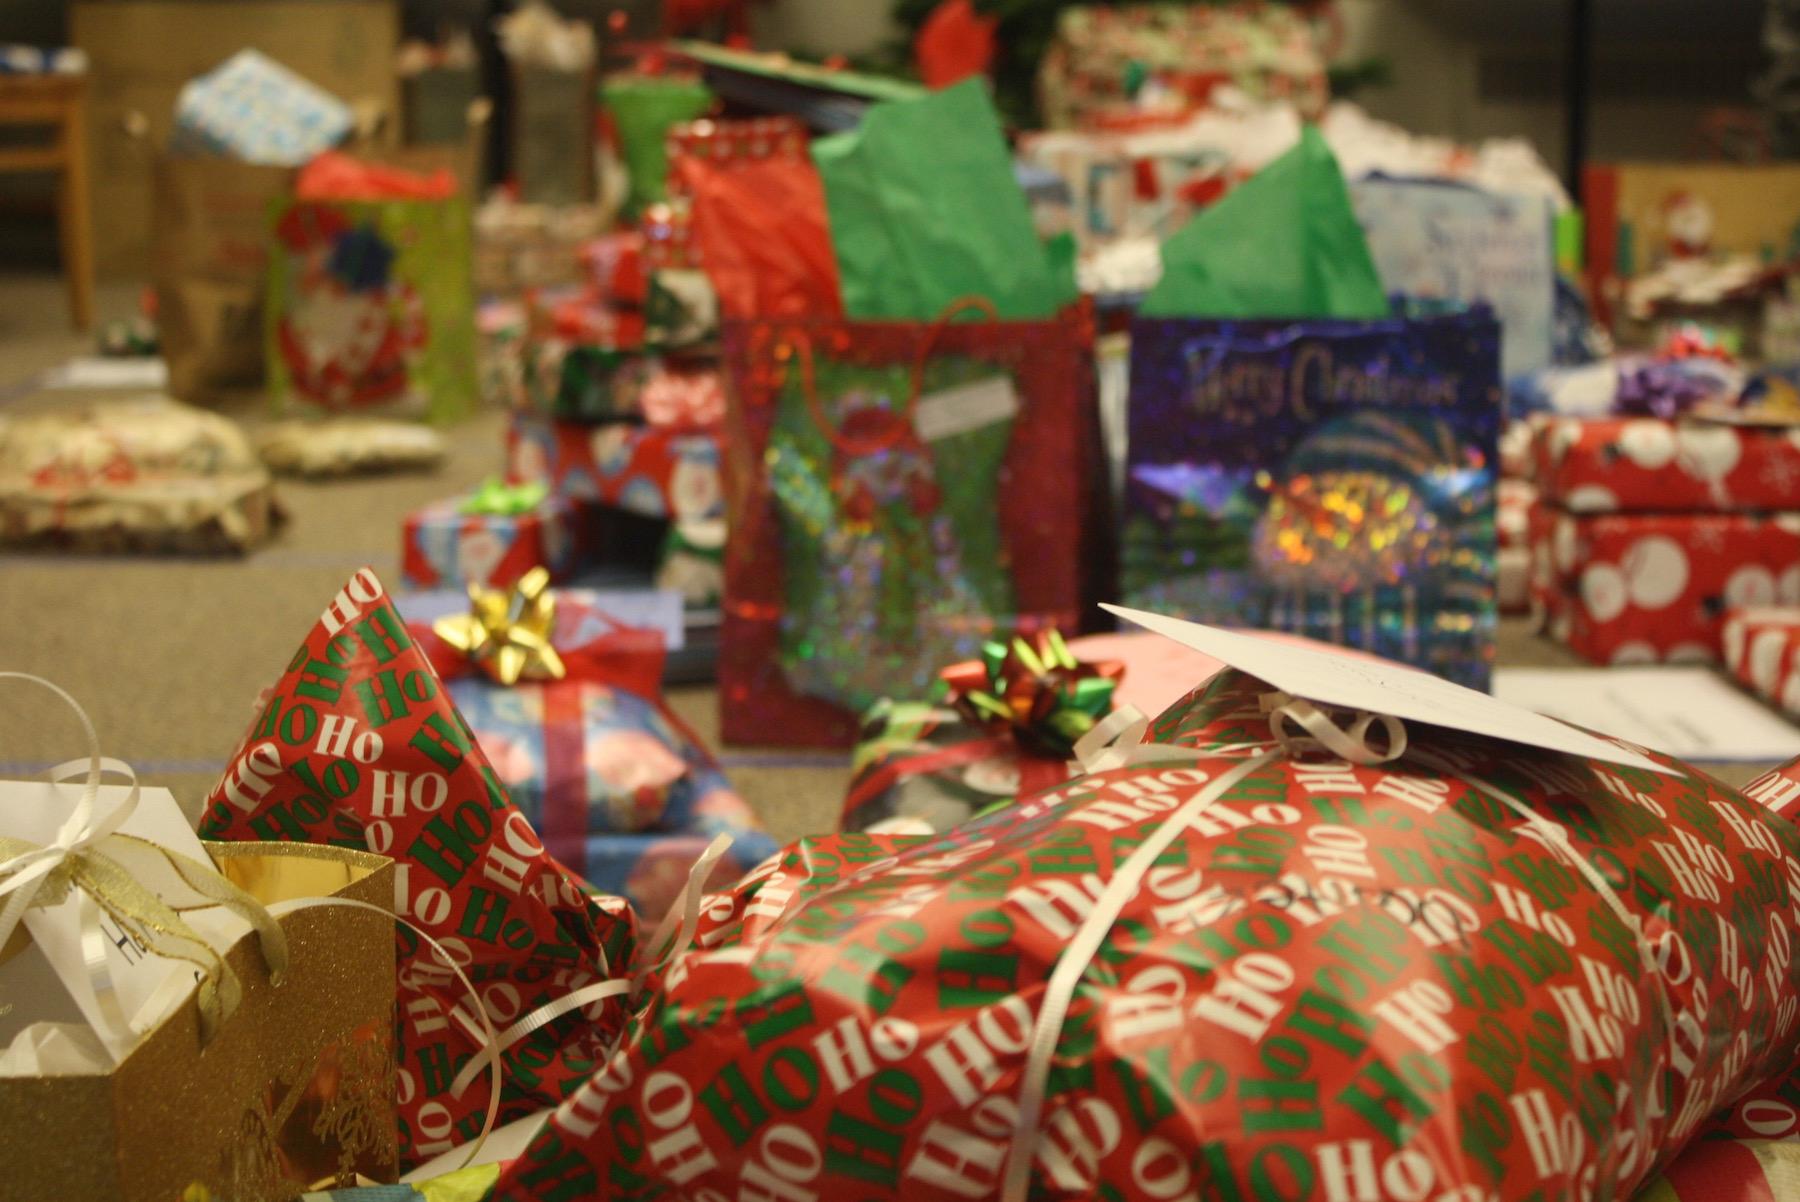 Elves+Wrap+Presents+for+Lot+Whitcomb+Families